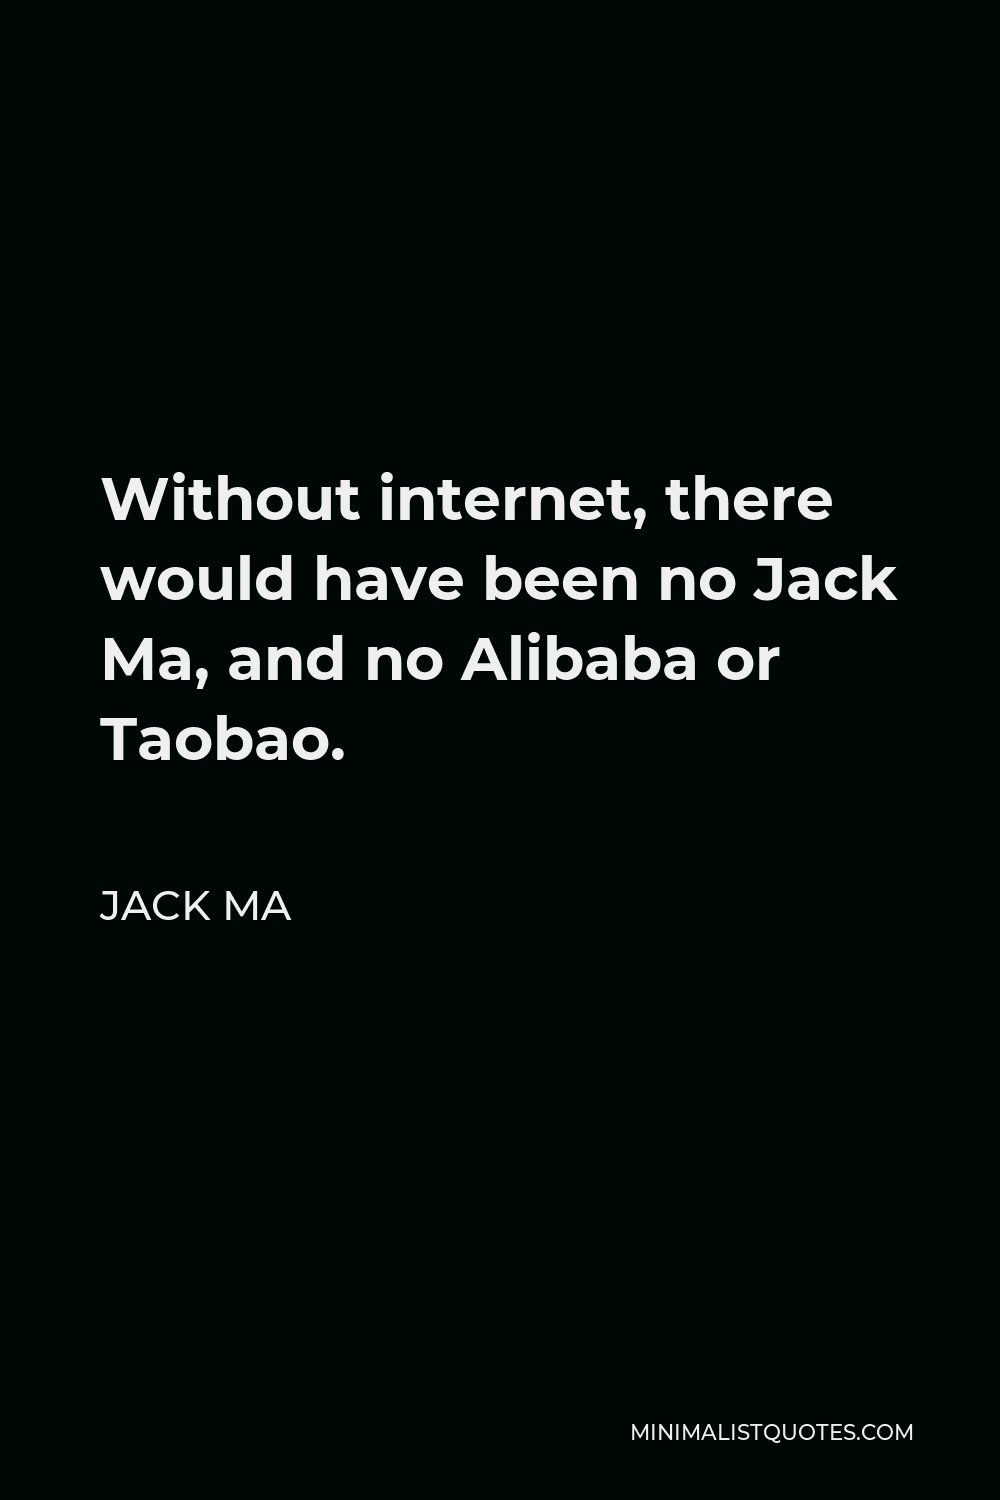 Jack Ma Quote - Without internet, there would have been no Jack Ma, and no Alibaba or Taobao.